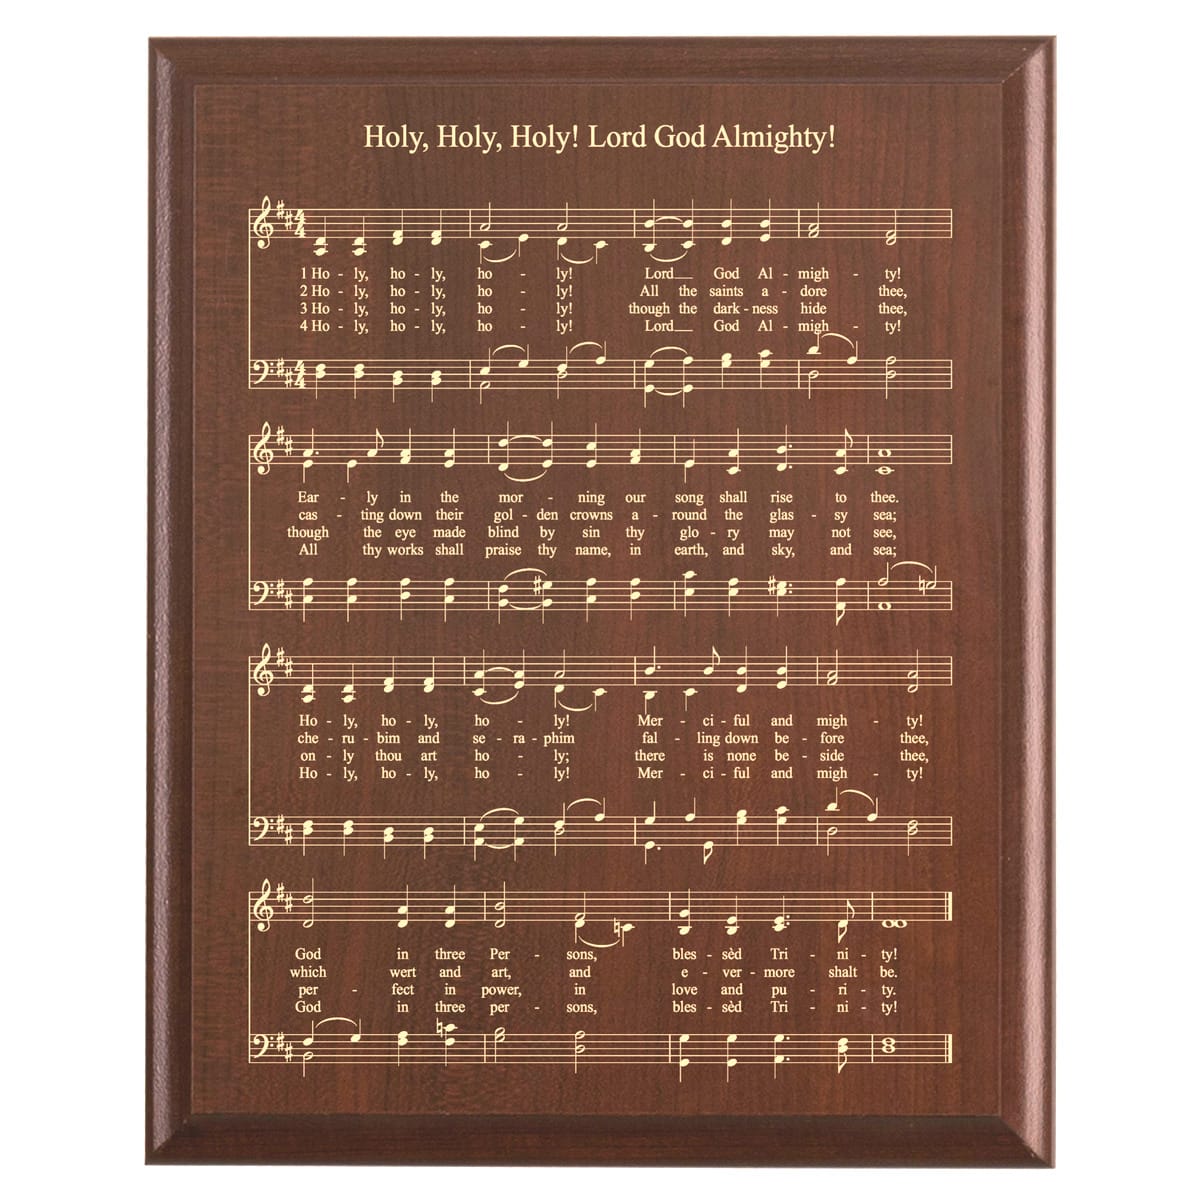 Plaque photo: Holy, Holy, Holy Hymn Plaque design with free personalization. Wood style finish with customized text.